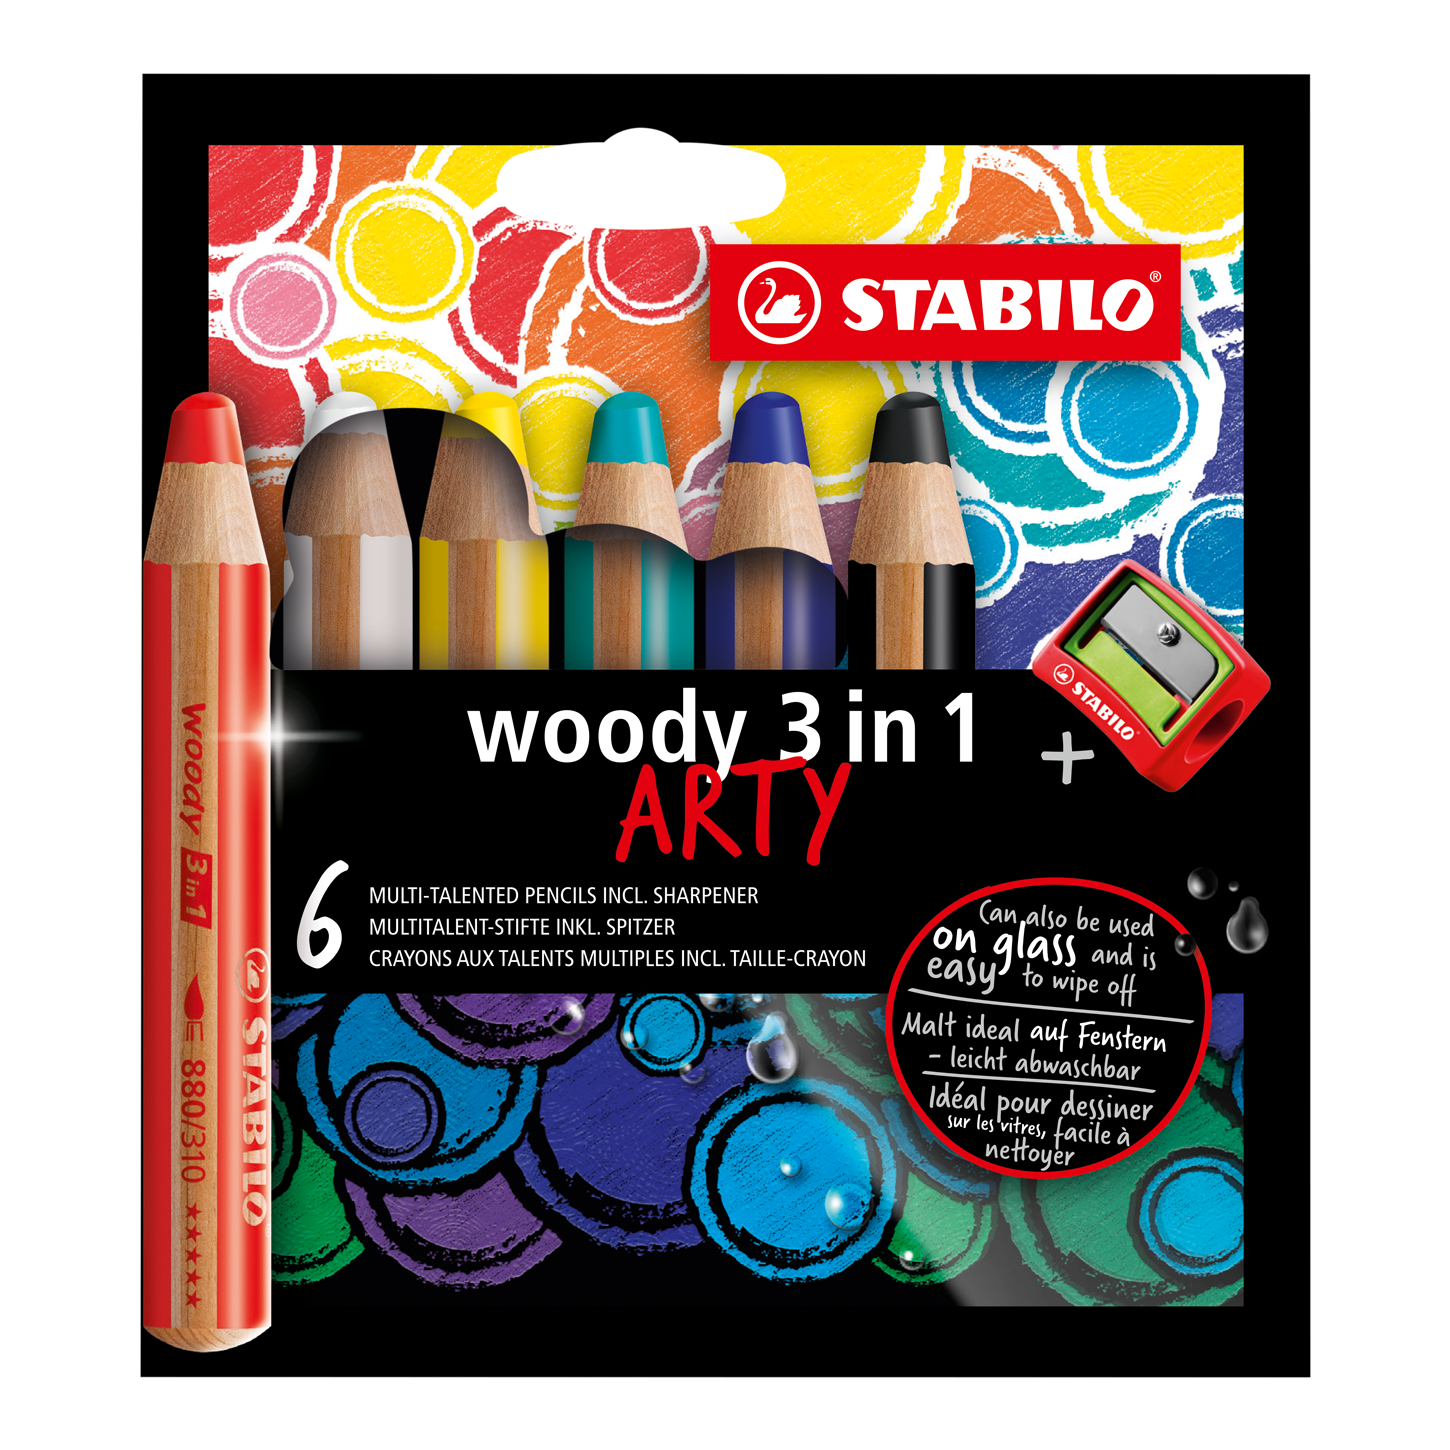 Stabilo Woody 3-in-1 Pencil, Set of 6 Pastel Colors with Sharpener